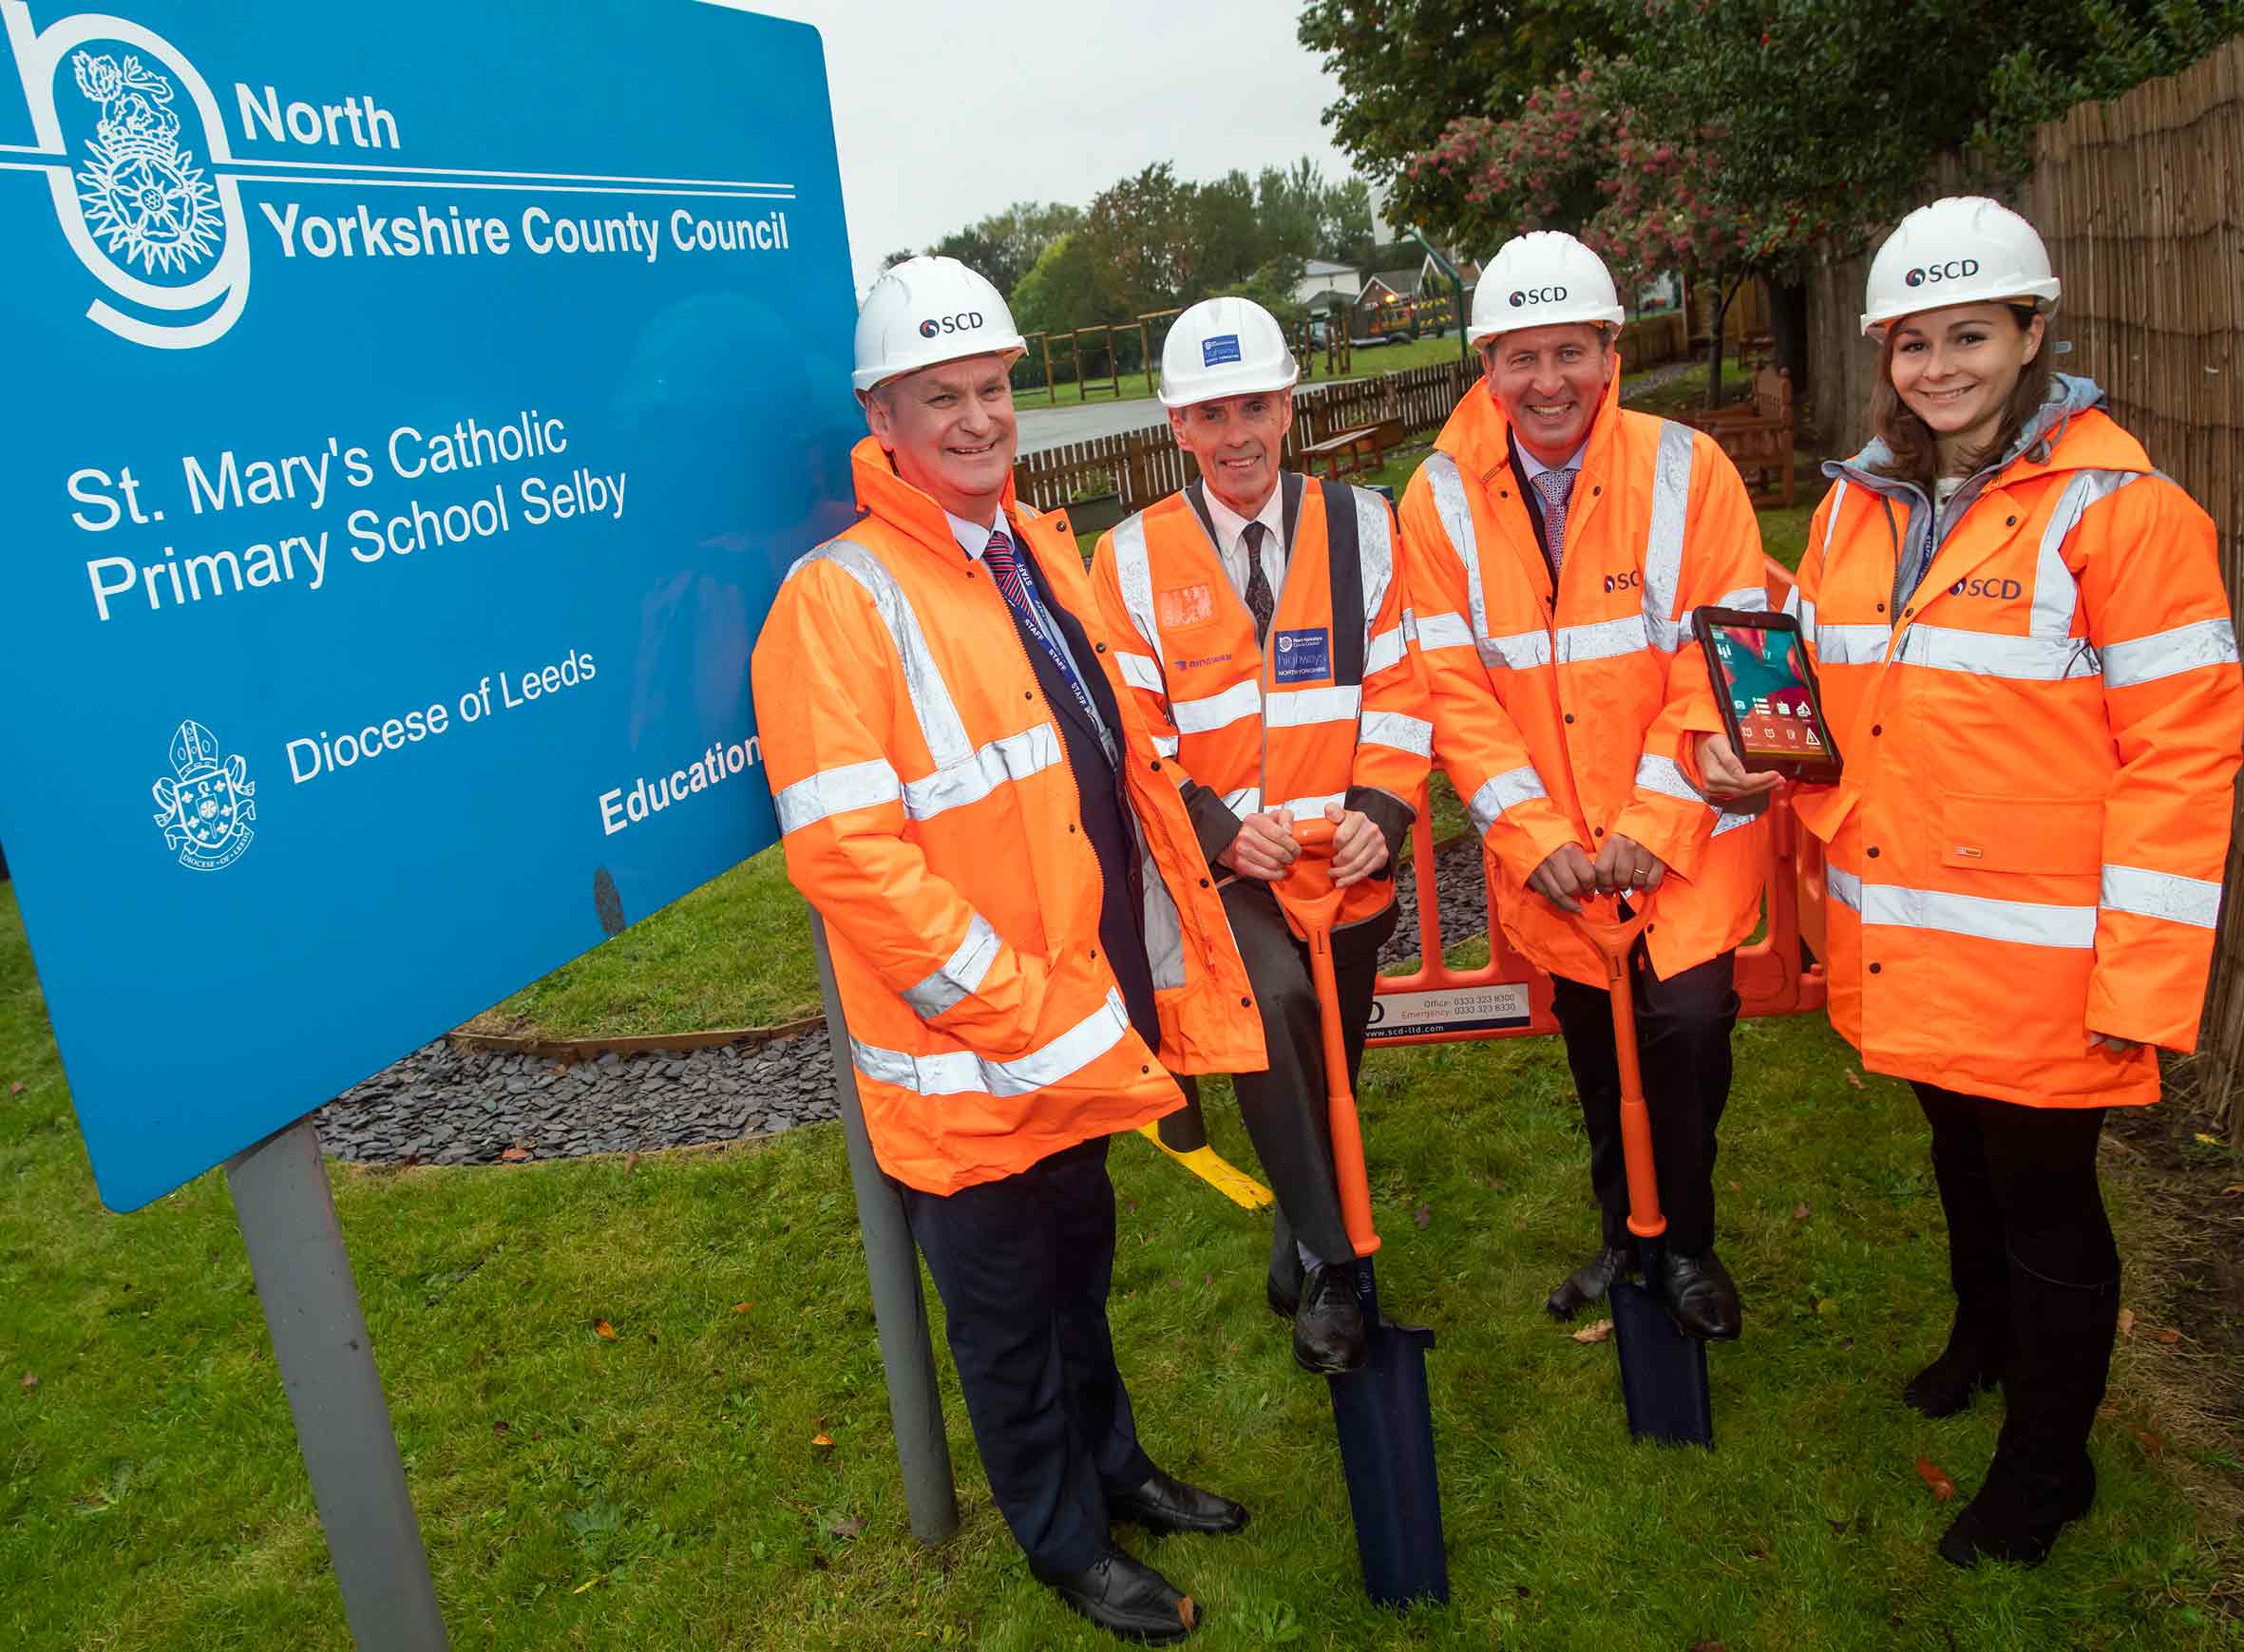 One of the first sites to benefit from the project is St Mary’s Primary School in Selby. Seeing the start of work are (from left): Graham Warren, NYnet Chief Operating Officer; Cllr Don Mackenzie, North Yorkshire’s Executive Member for Access; Chris Durkan, Chairman SCD Group; and Lorna Kennett, NYnet Project Support Officer